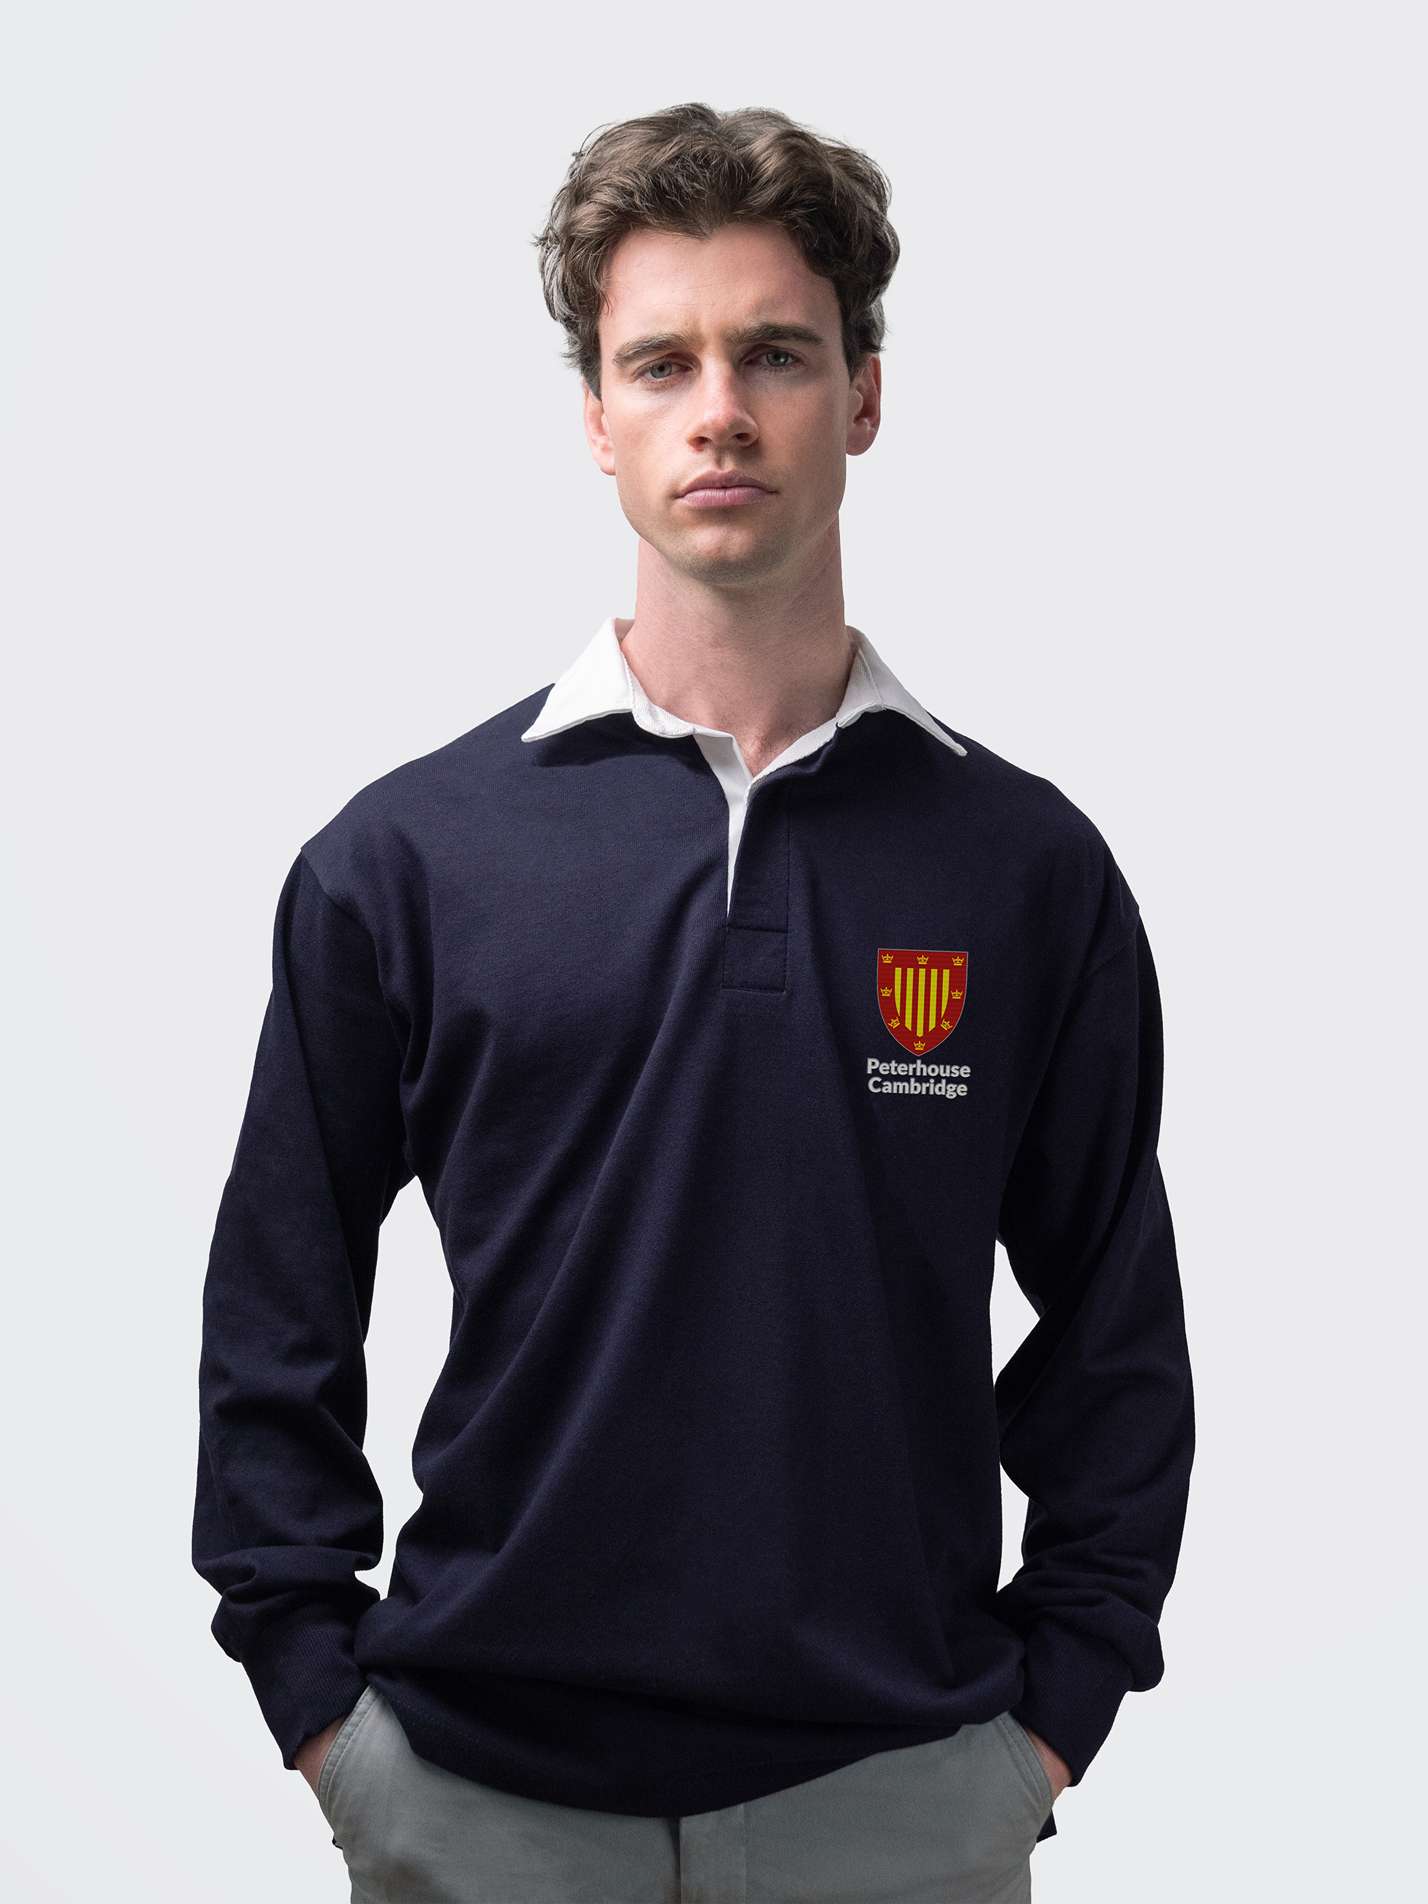 Peterhouse student wearing an embroidered mens rugby shirt in navy